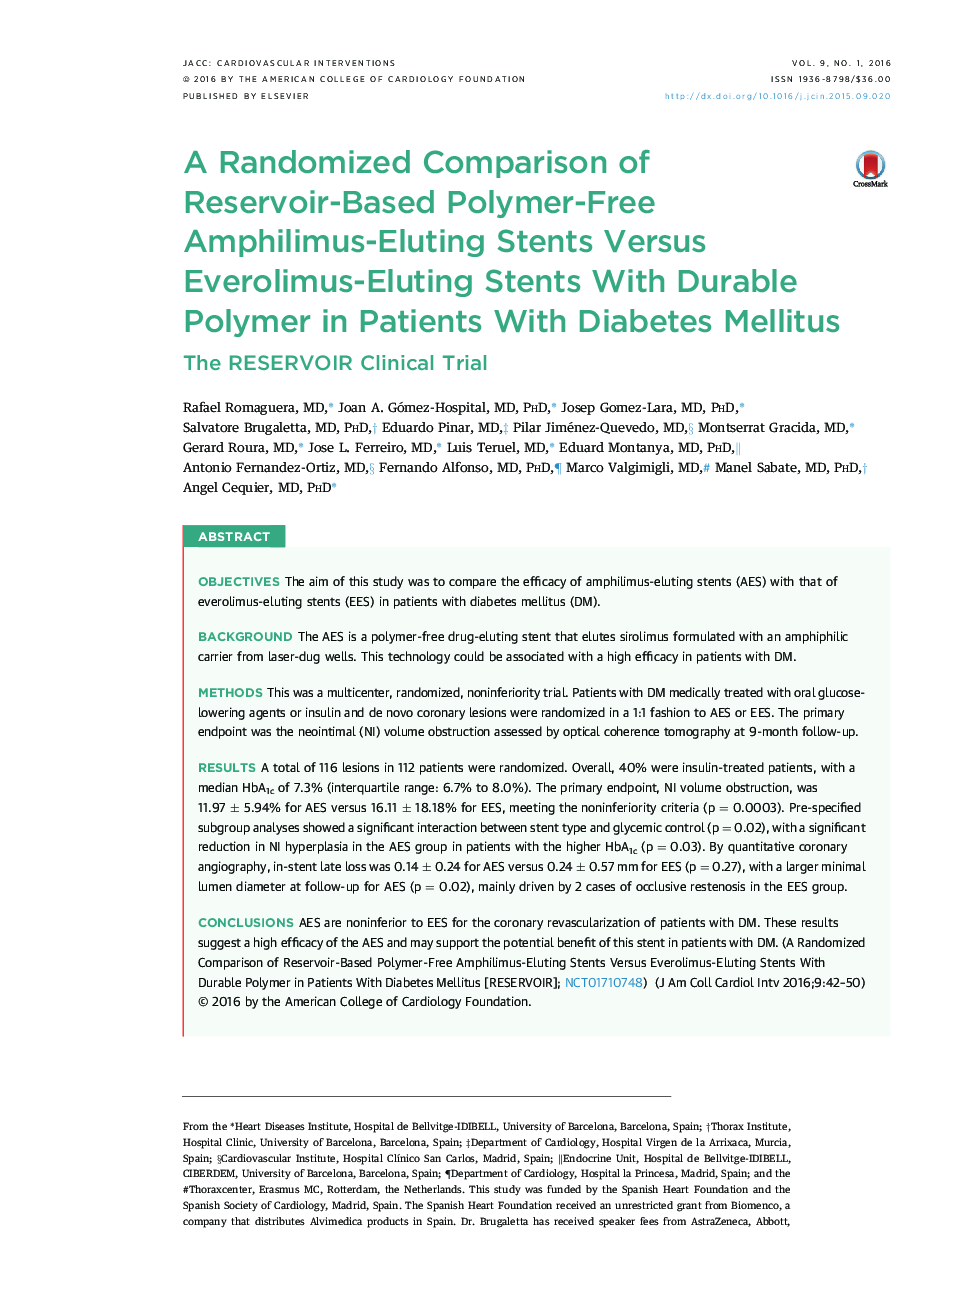 A Randomized Comparison of Reservoir-Based Polymer-Free Amphilimus-Eluting Stents Versus Everolimus-Eluting Stents With Durable Polymer in Patients With DiabetesÂ Mellitus: The RESERVOIR Clinical Trial